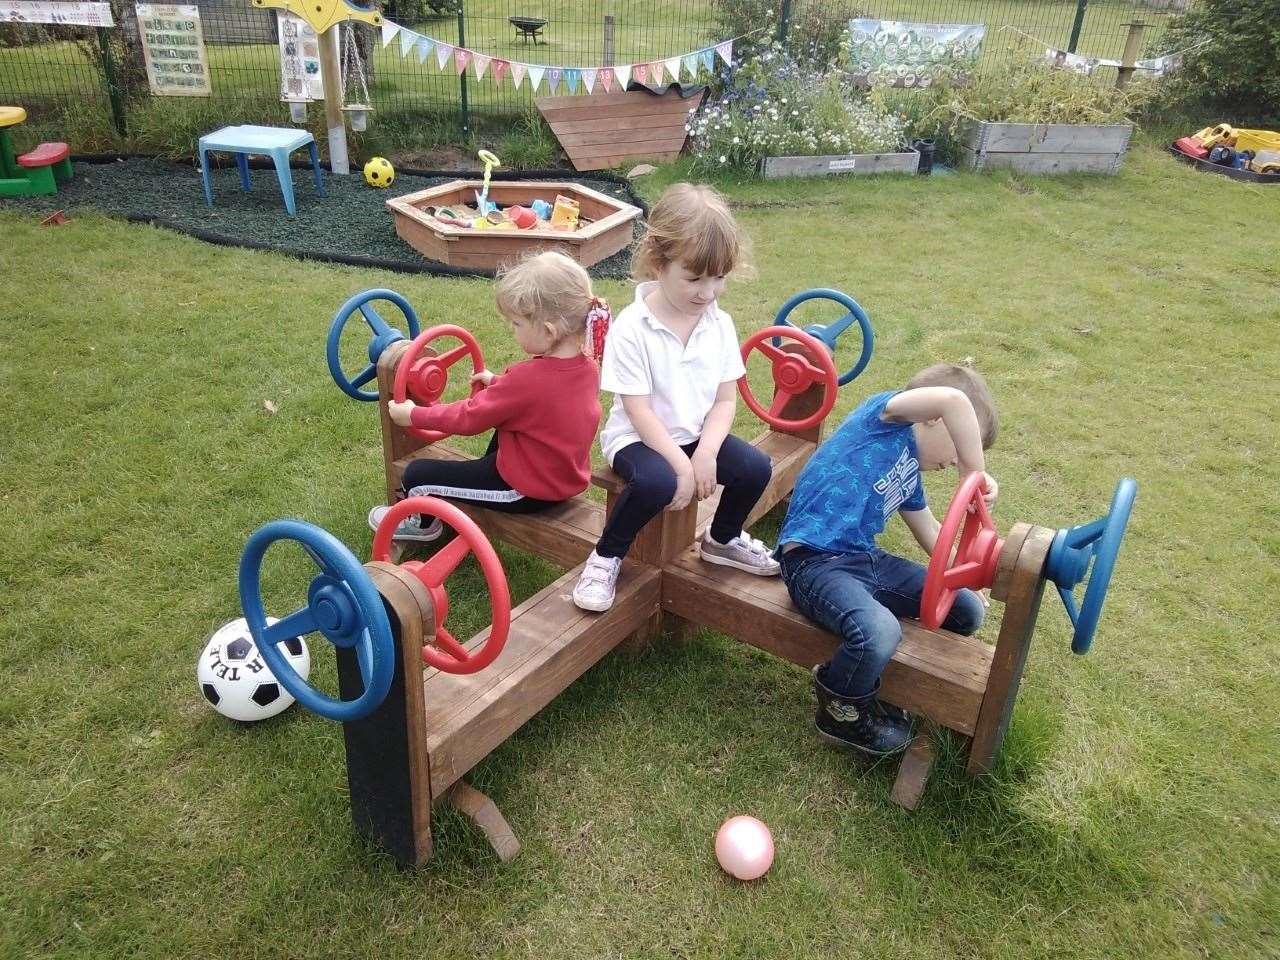 Children enjoy the outdoor setting at Reay ELC.